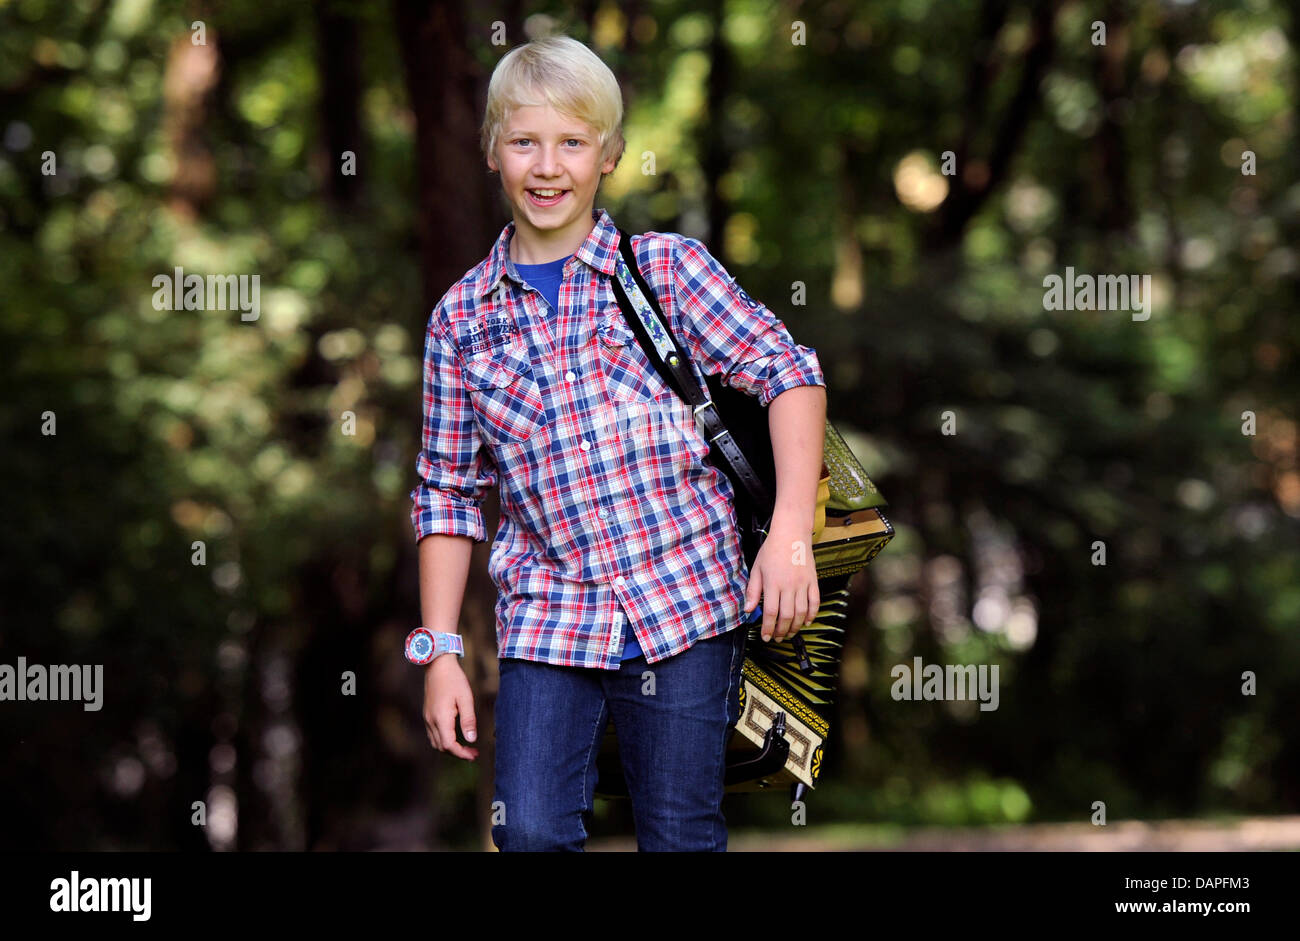 Twelve-year-old musician Quirin Weber poses in Munich, Germany, 17 August 2011. Weber could be the new star in German folk music. On 19 August 2011, Weber's first Album 'Musik, fertig, los!' ('Music, ready, go!') will be in stores. Photo: Tobias Hase Stock Photo